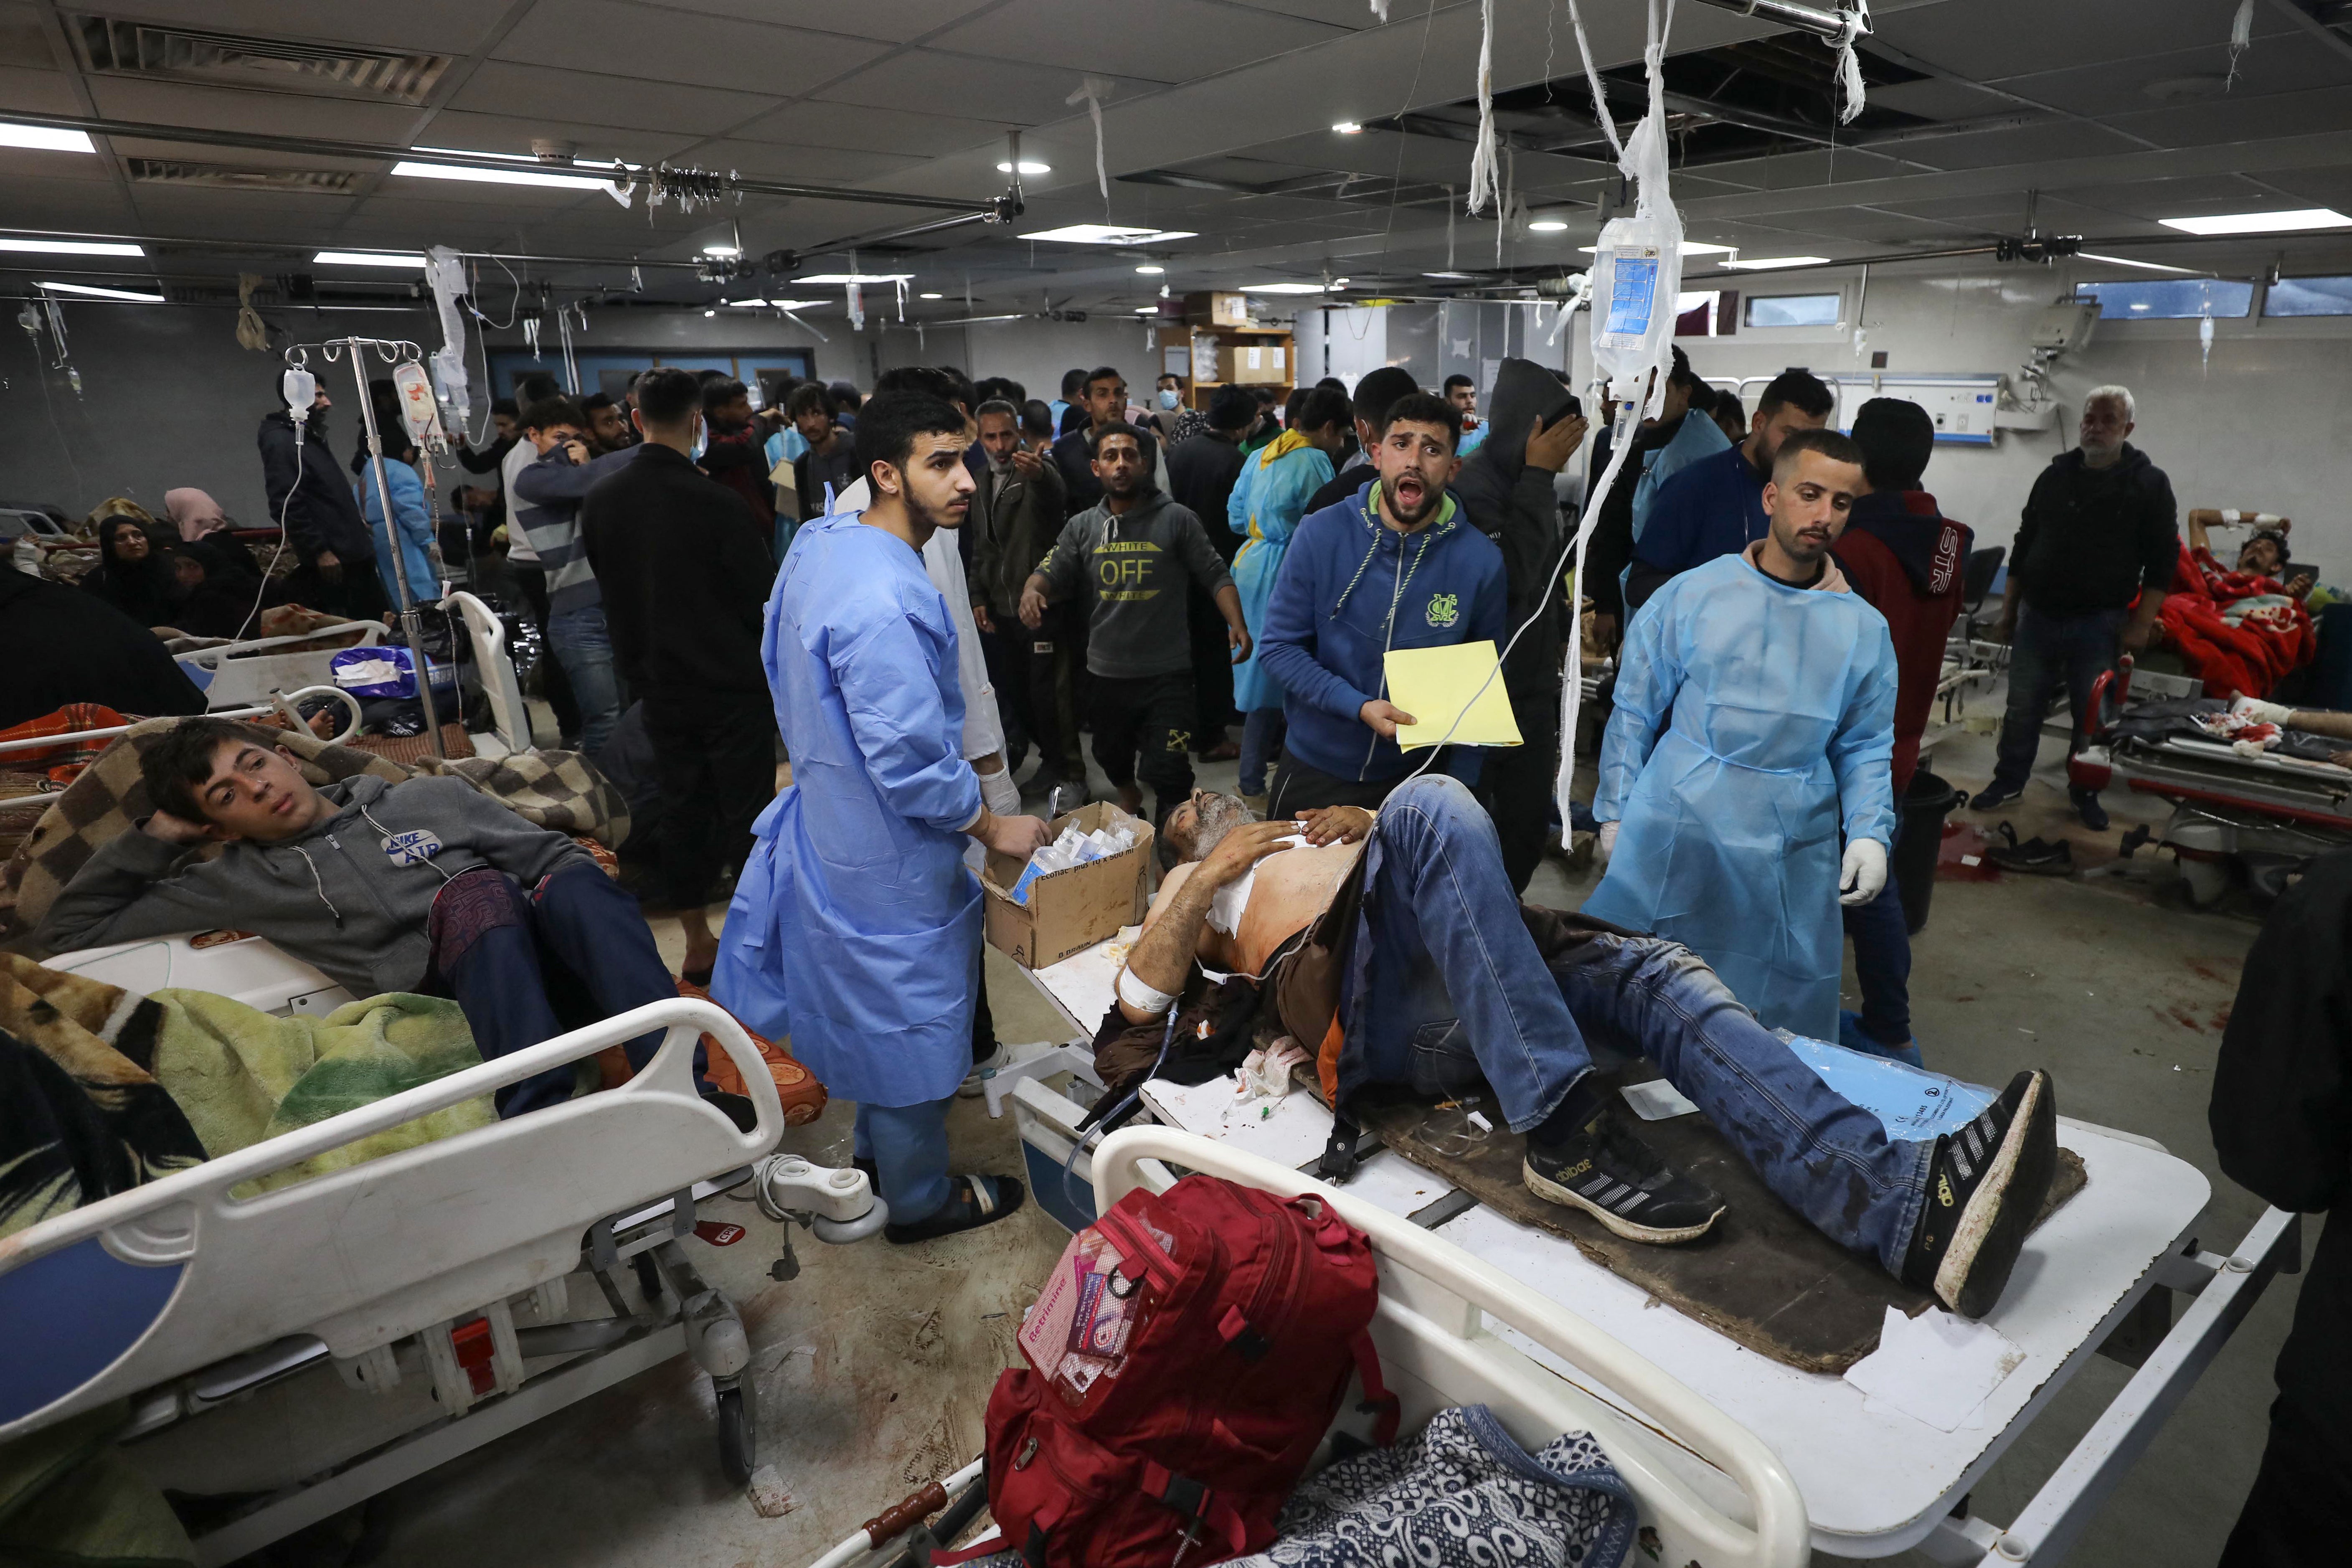 Injured Palestinians are brought to al-Shifa hospital in Gaza City following an Israeli airstrike on Sunday